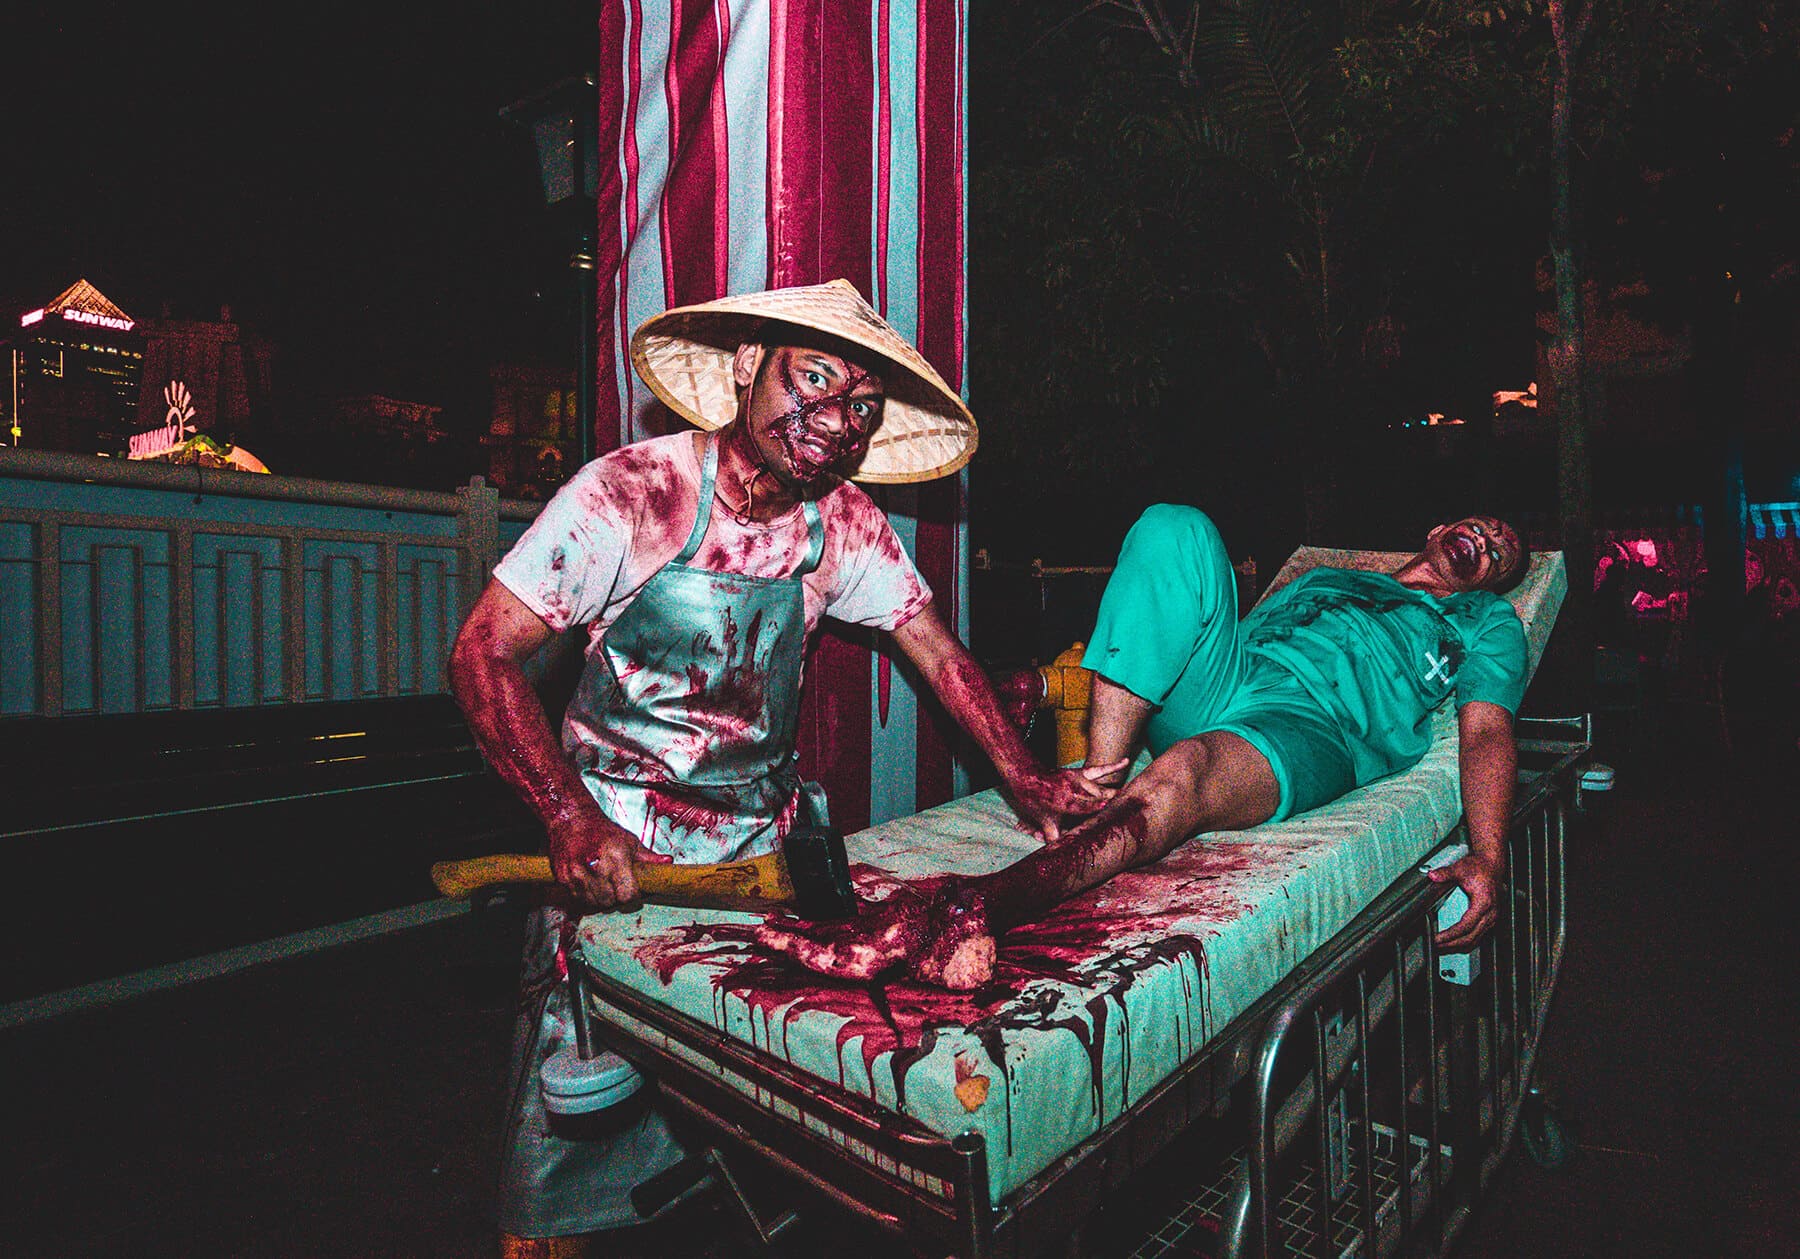 Sunway Lagoon’s Nights of Fright 8 happening this Halloween is the perfect activity for this group of thrill-seekers.